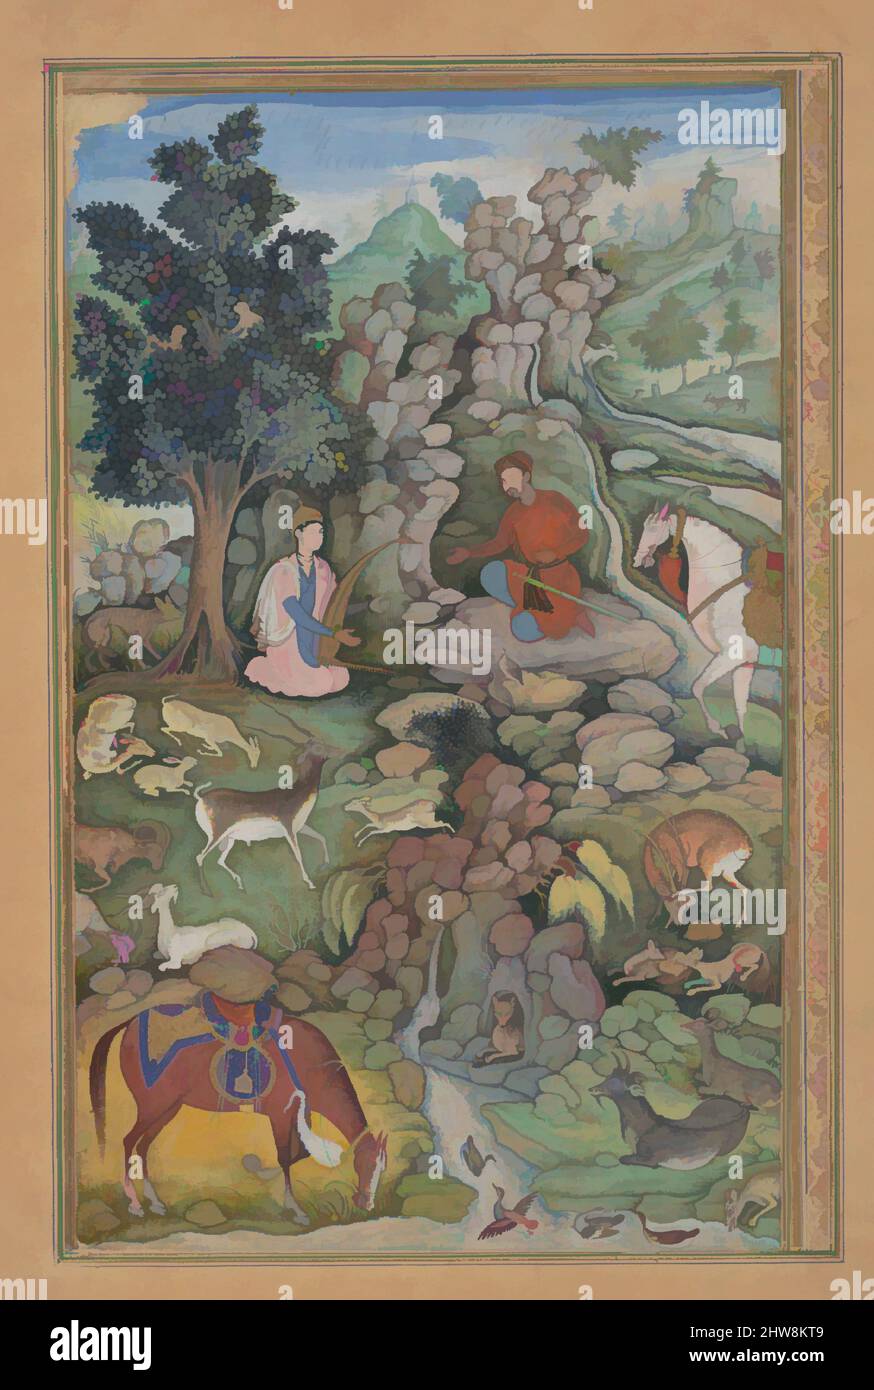 Art inspired by Bahram Gur Sees a Herd of Deer Mesmerized by Dilaram' s Music', Folio from a Khamsa (Quintet) of Amir Khusrau Dihlavi, 1597–98, Attributed to India, Main support: ink, opaque watercolor, and gold on paper, 9 5/8 x 5 15/16in. (24.5 x 15.1cm), Codices, Attributed to, Classic works modernized by Artotop with a splash of modernity. Shapes, color and value, eye-catching visual impact on art. Emotions through freedom of artworks in a contemporary way. A timeless message pursuing a wildly creative new direction. Artists turning to the digital medium and creating the Artotop NFT Stock Photo